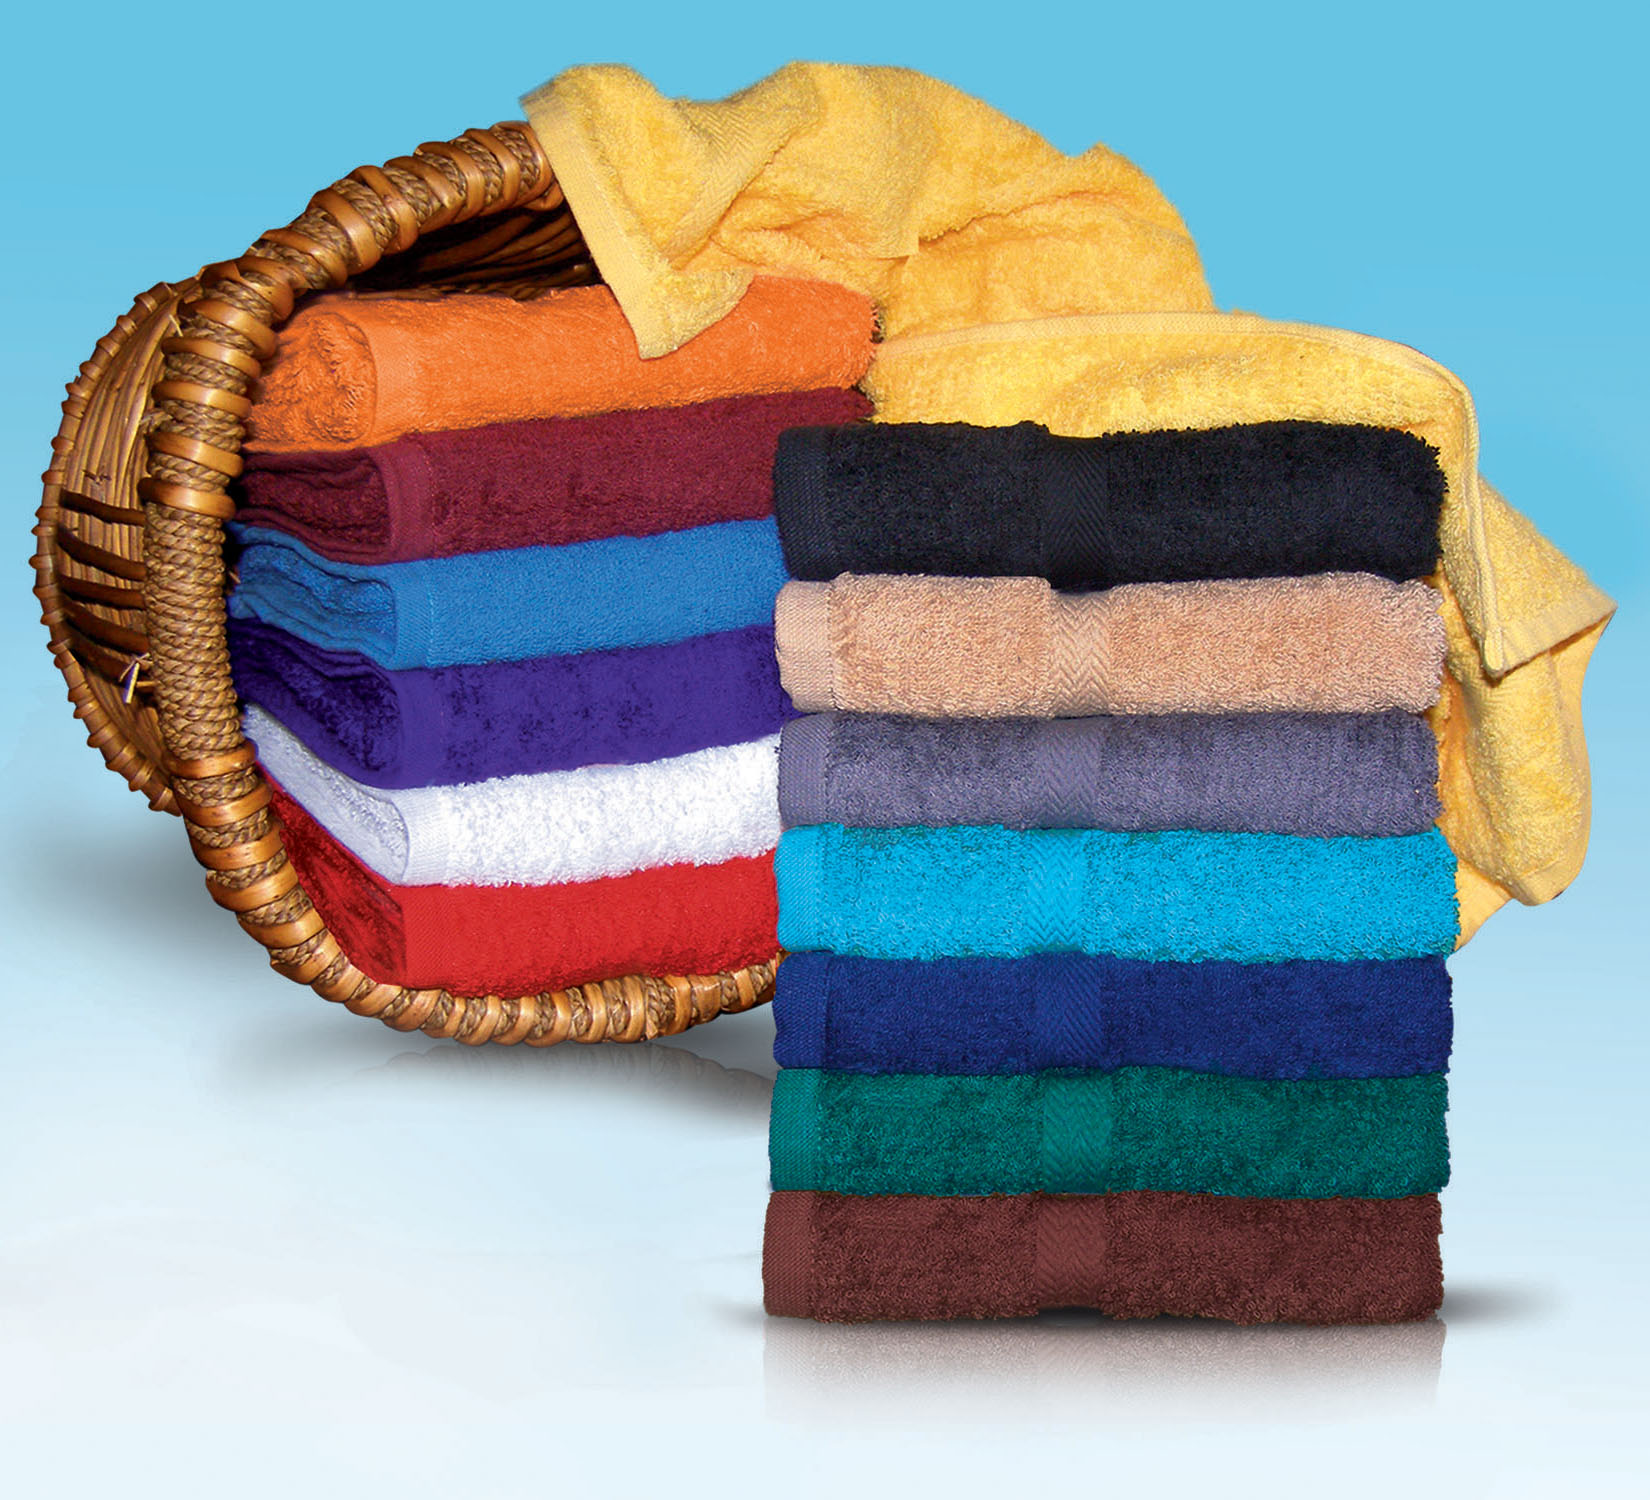 EMBROIDERED 16x30 Hand Towels by Royal Comfort. 4. Lbs per/ dz. weight.